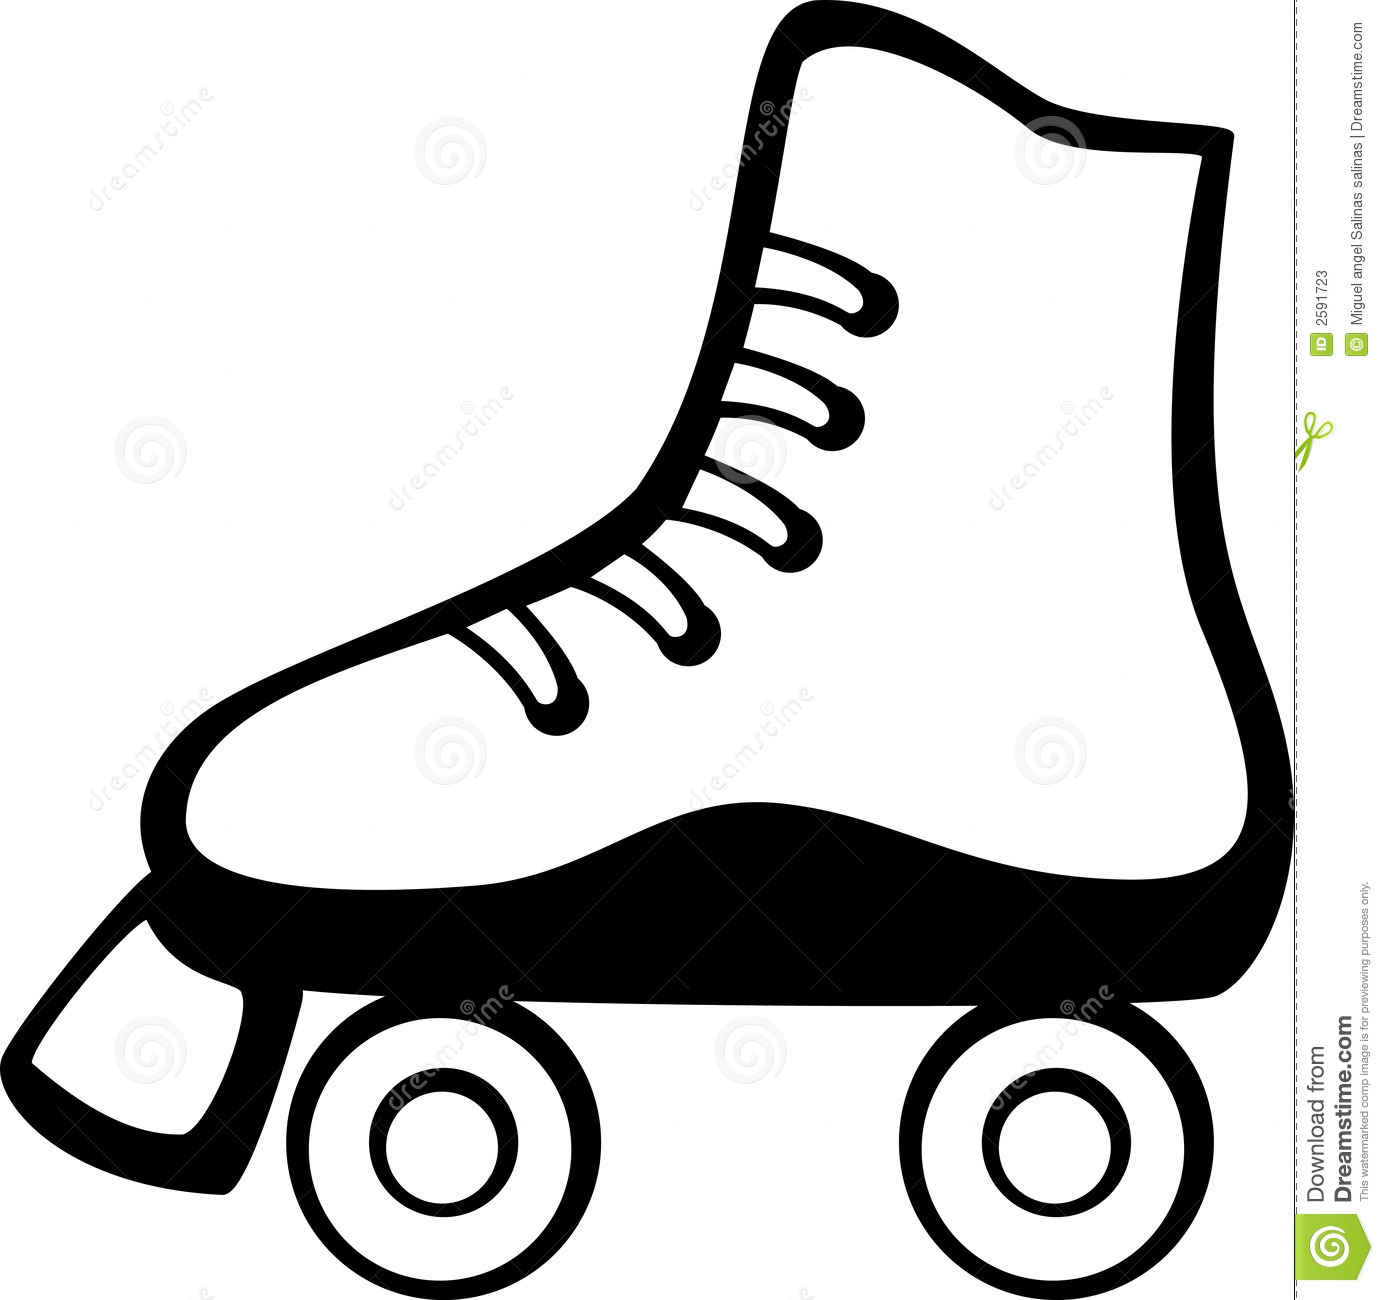 Roller 20clipart Clipart Pand - Skating Clip Art